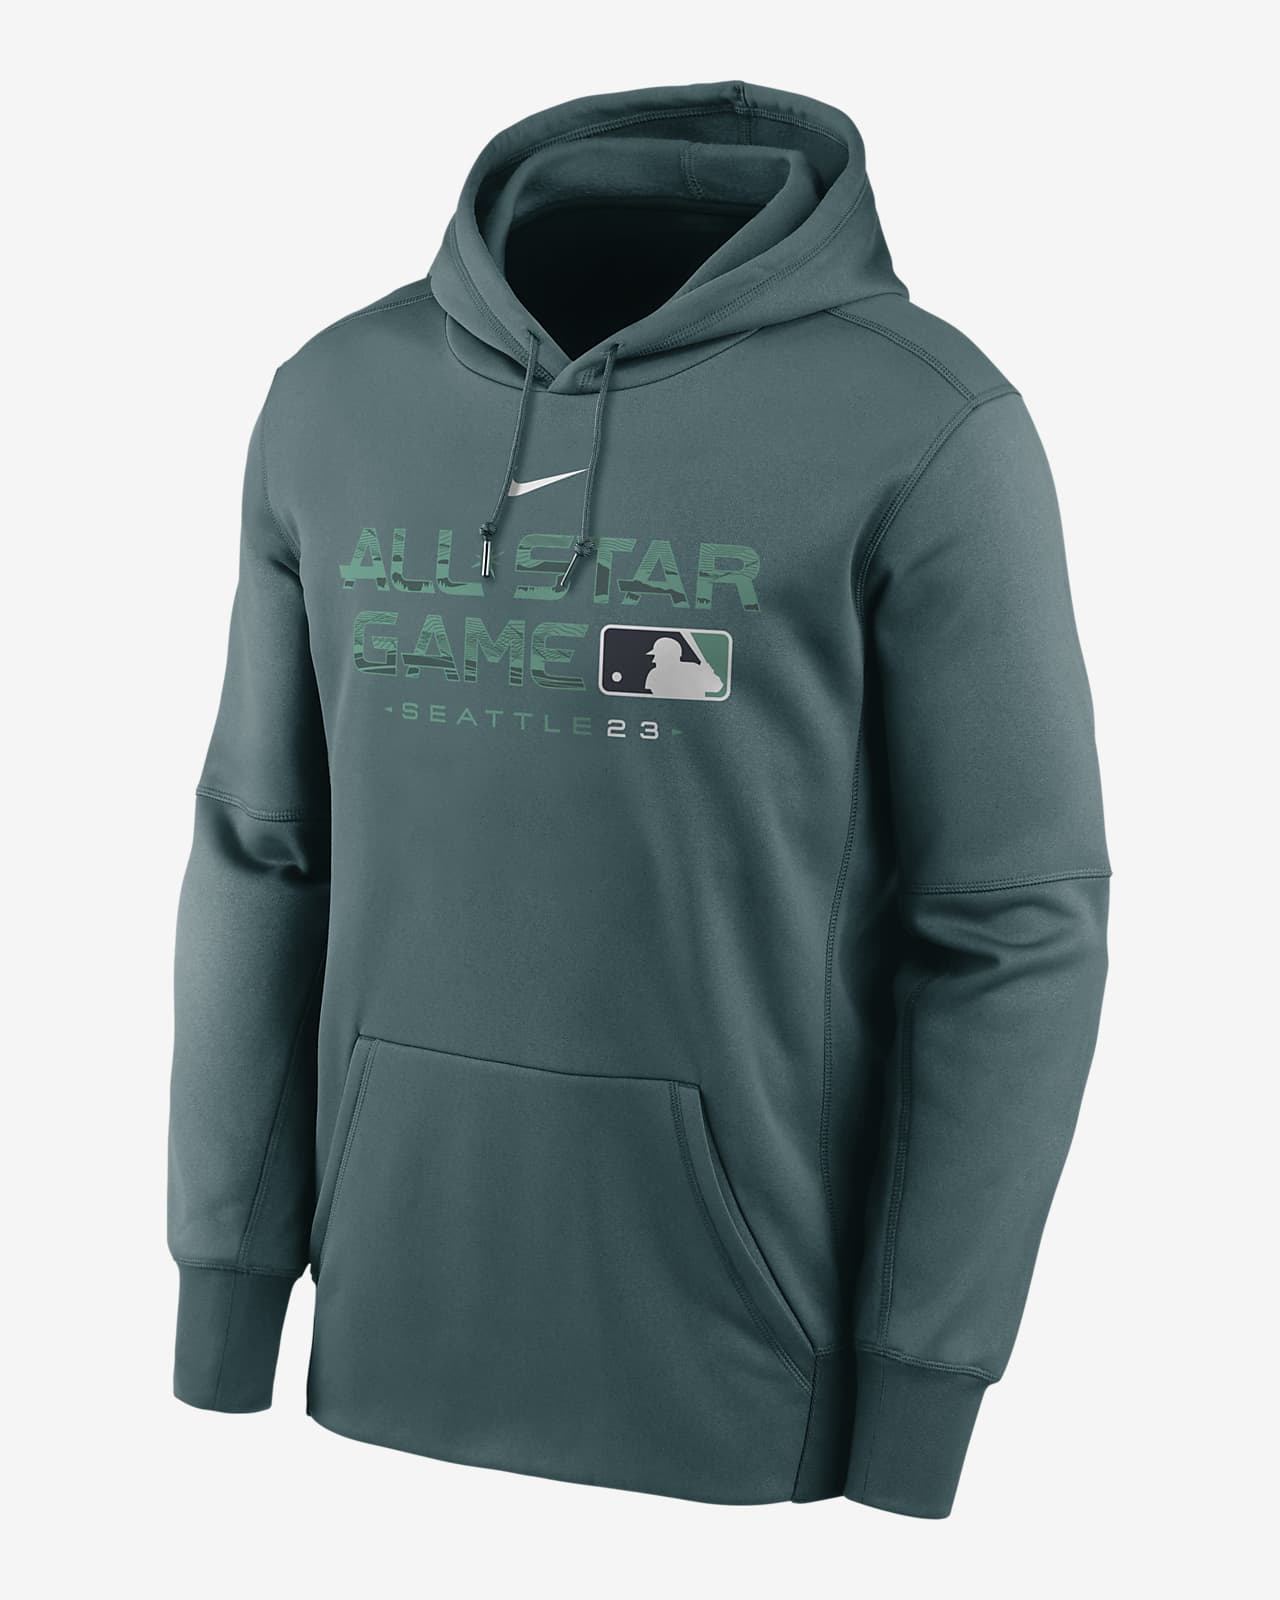 2023 All-Star Game Player Men’s Nike Therma MLB Pullover Hoodie